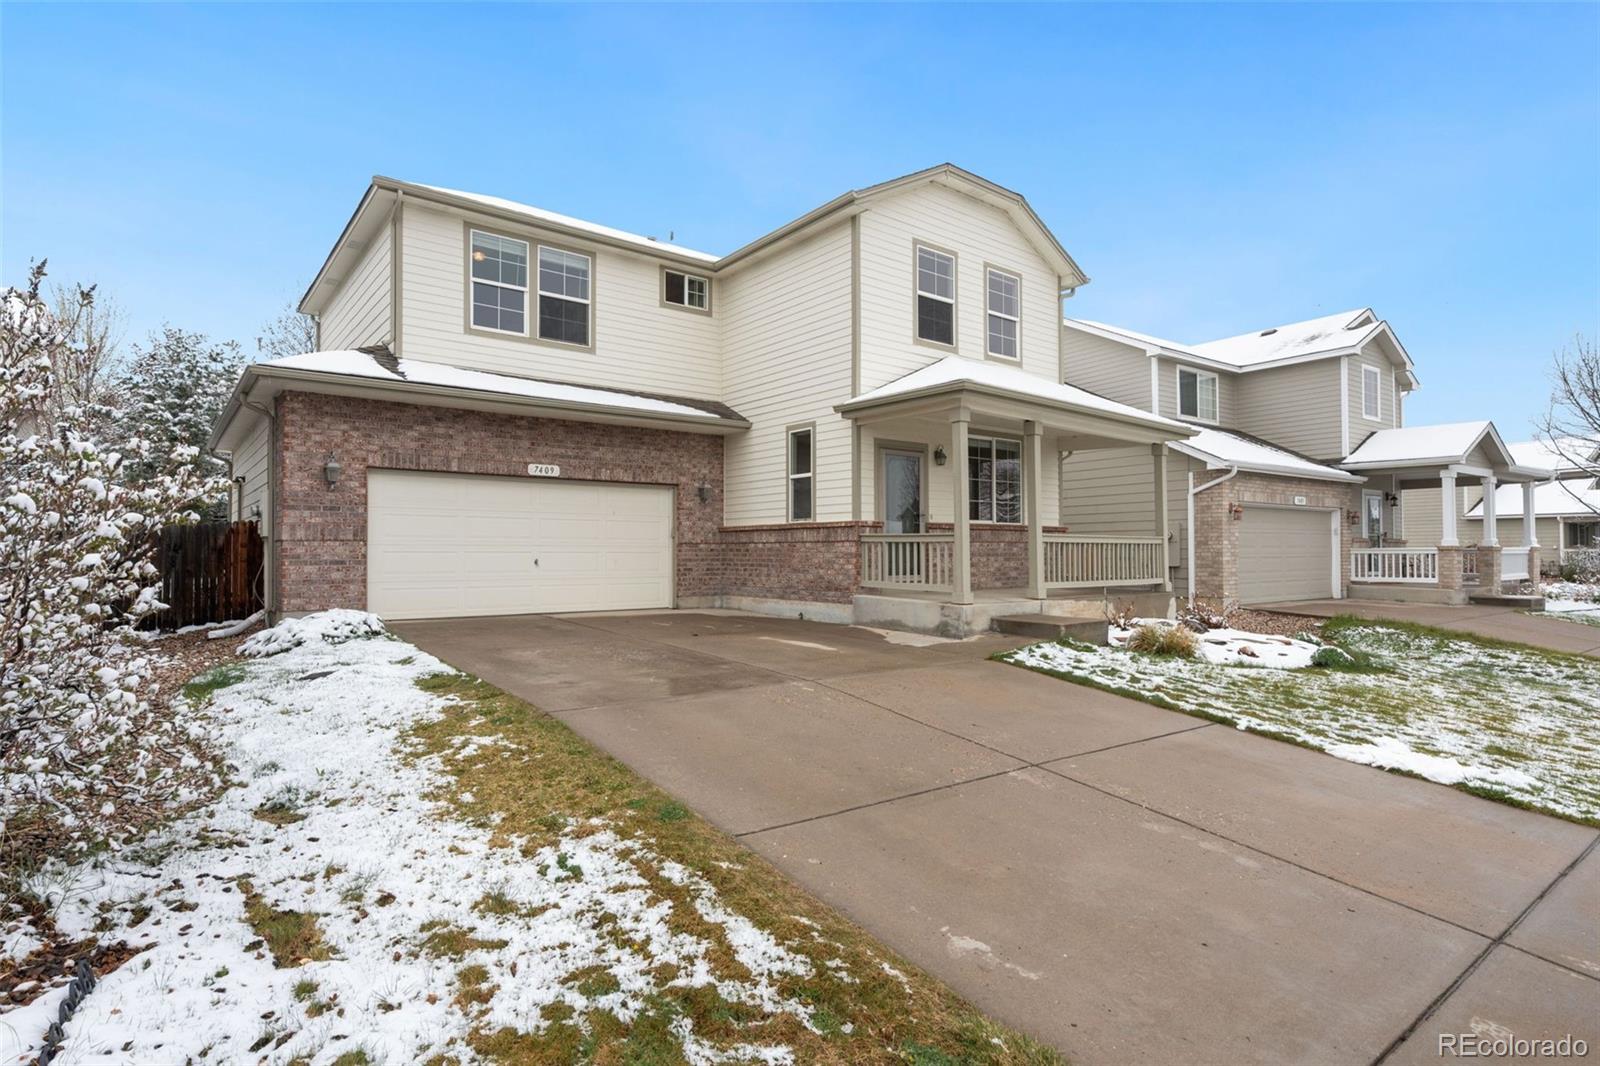 Report Image for 7409  Triangle Drive,Fort Collins, Colorado